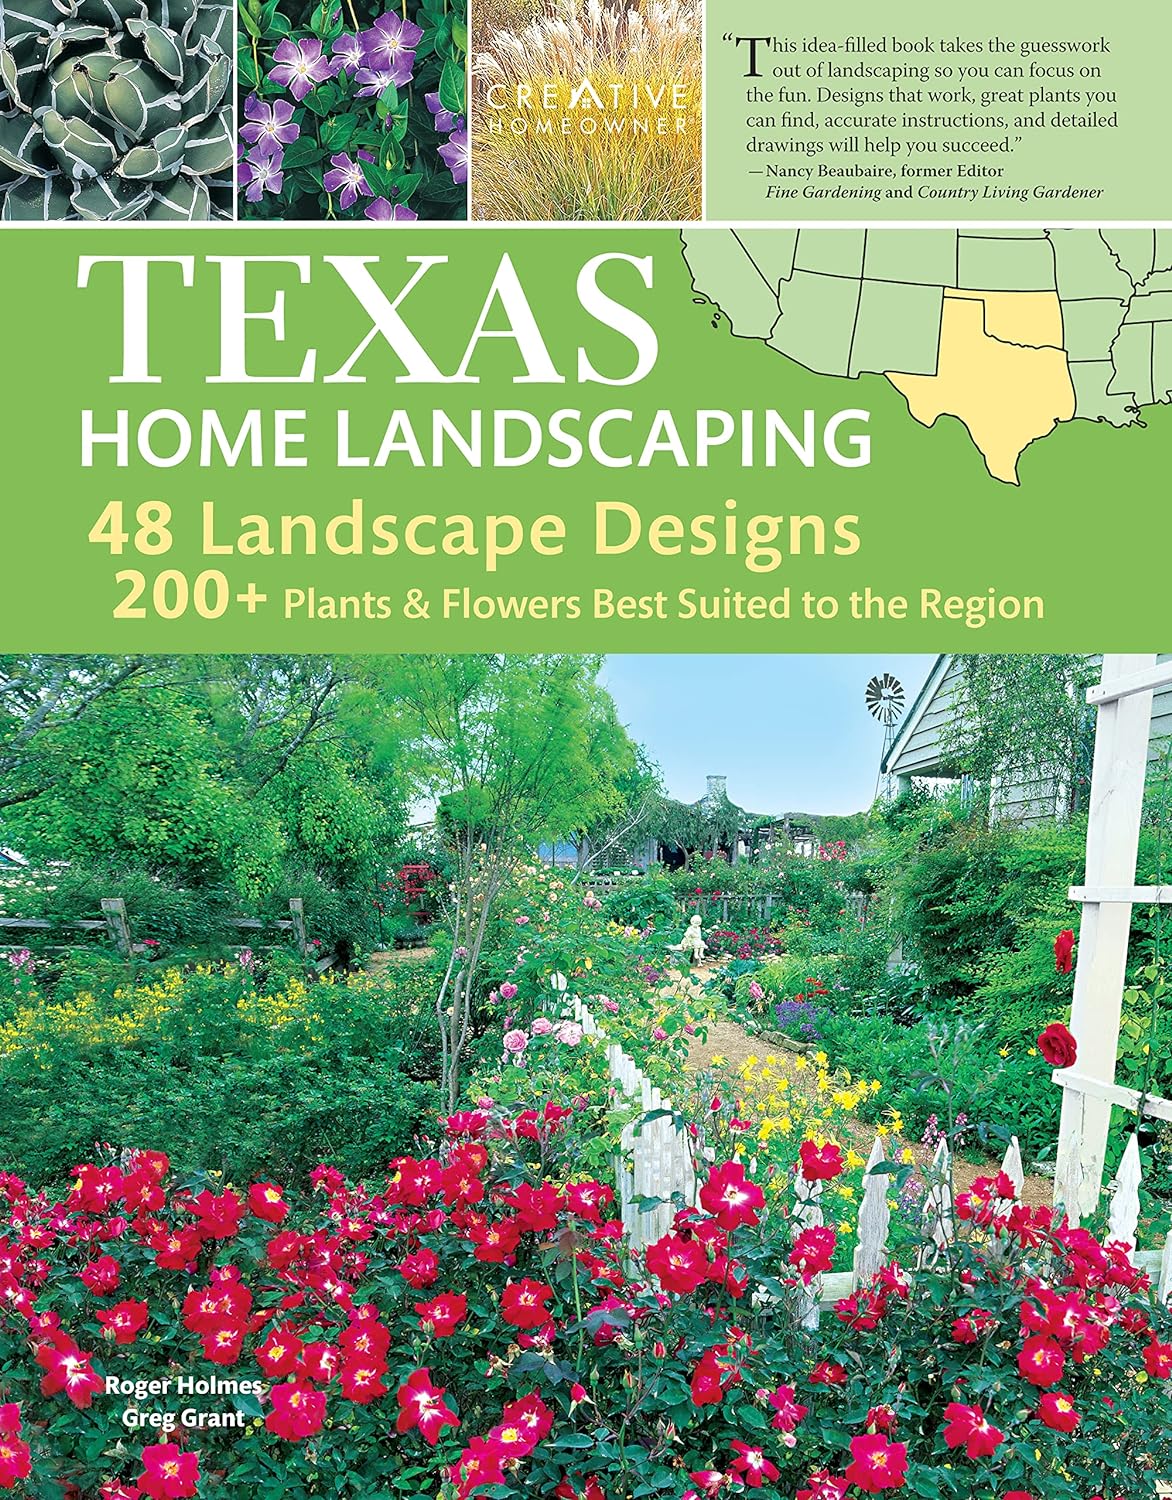 Texas Home Landscaping, 3rd Edition: 48 Landscape Designs, 200+ Plants & Flowers Best Suited to the Region (Creative Homeowner) Gardening Ideas, Plans, and Outdoor DIY Projects for TX and OK Paperback  Illustrated, July 25, 2011